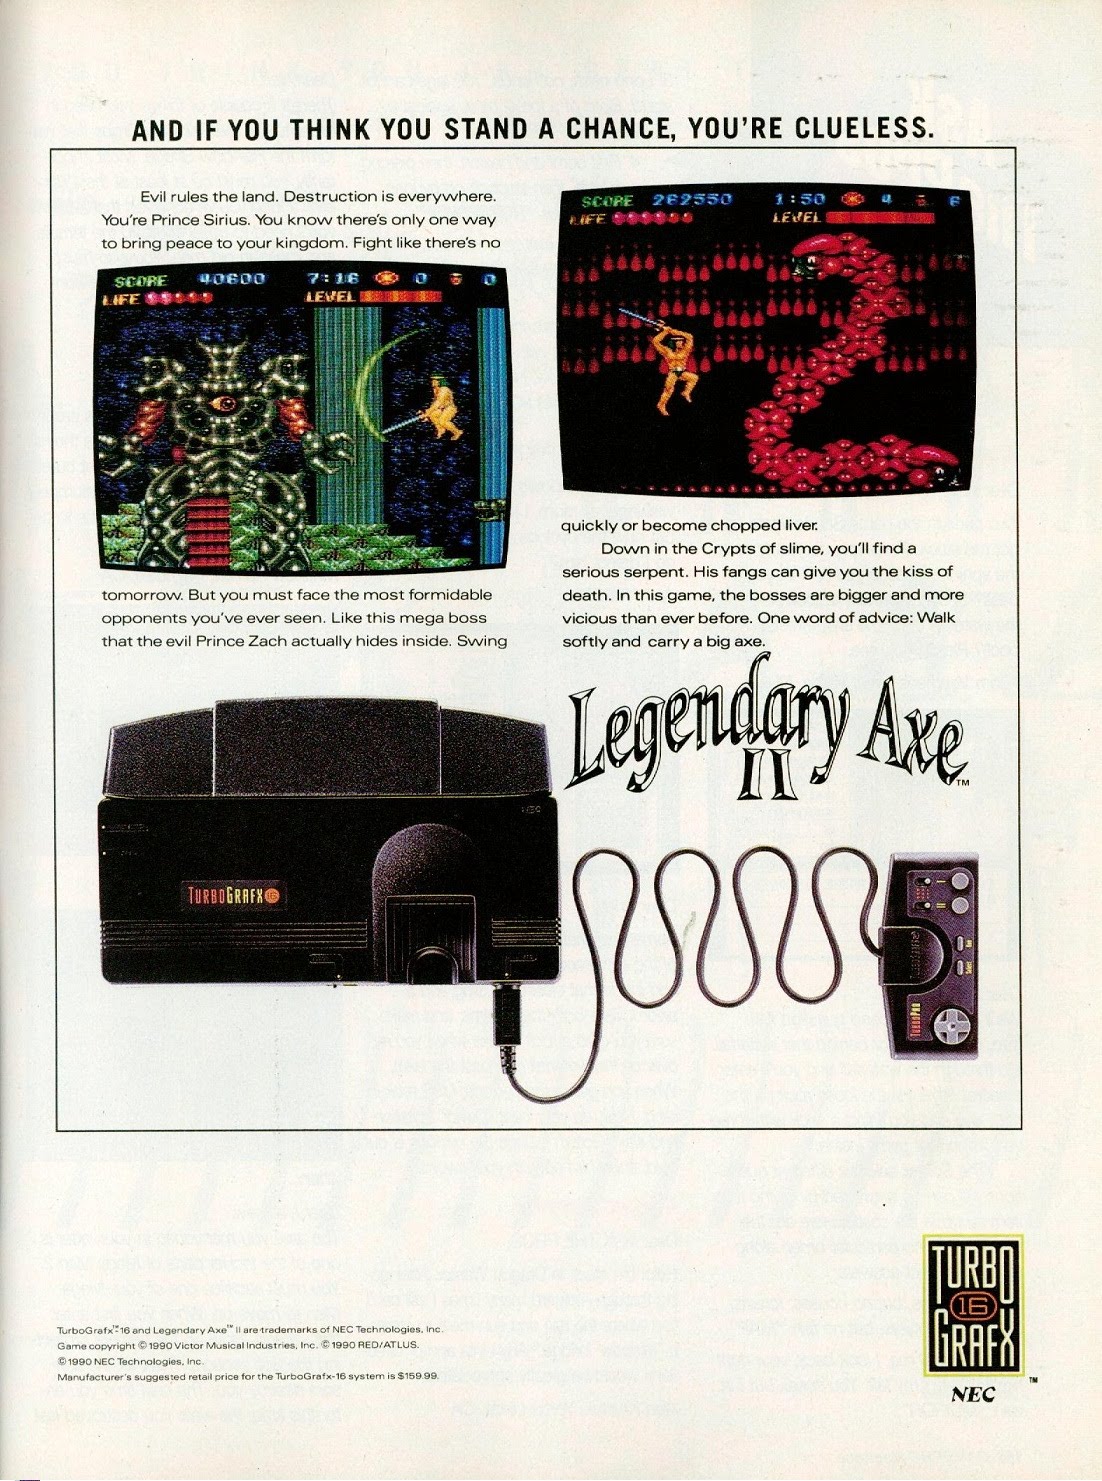 vintage gaming ads - turbografx-16 - And If You Think You Stand A Chance. You'Re Clueless. Score 262550 Evil rules the land. Destruction is everywhere. You're Prince Sirius. You know there's only one way to bring peace to your kingdom. Fight there's no Le